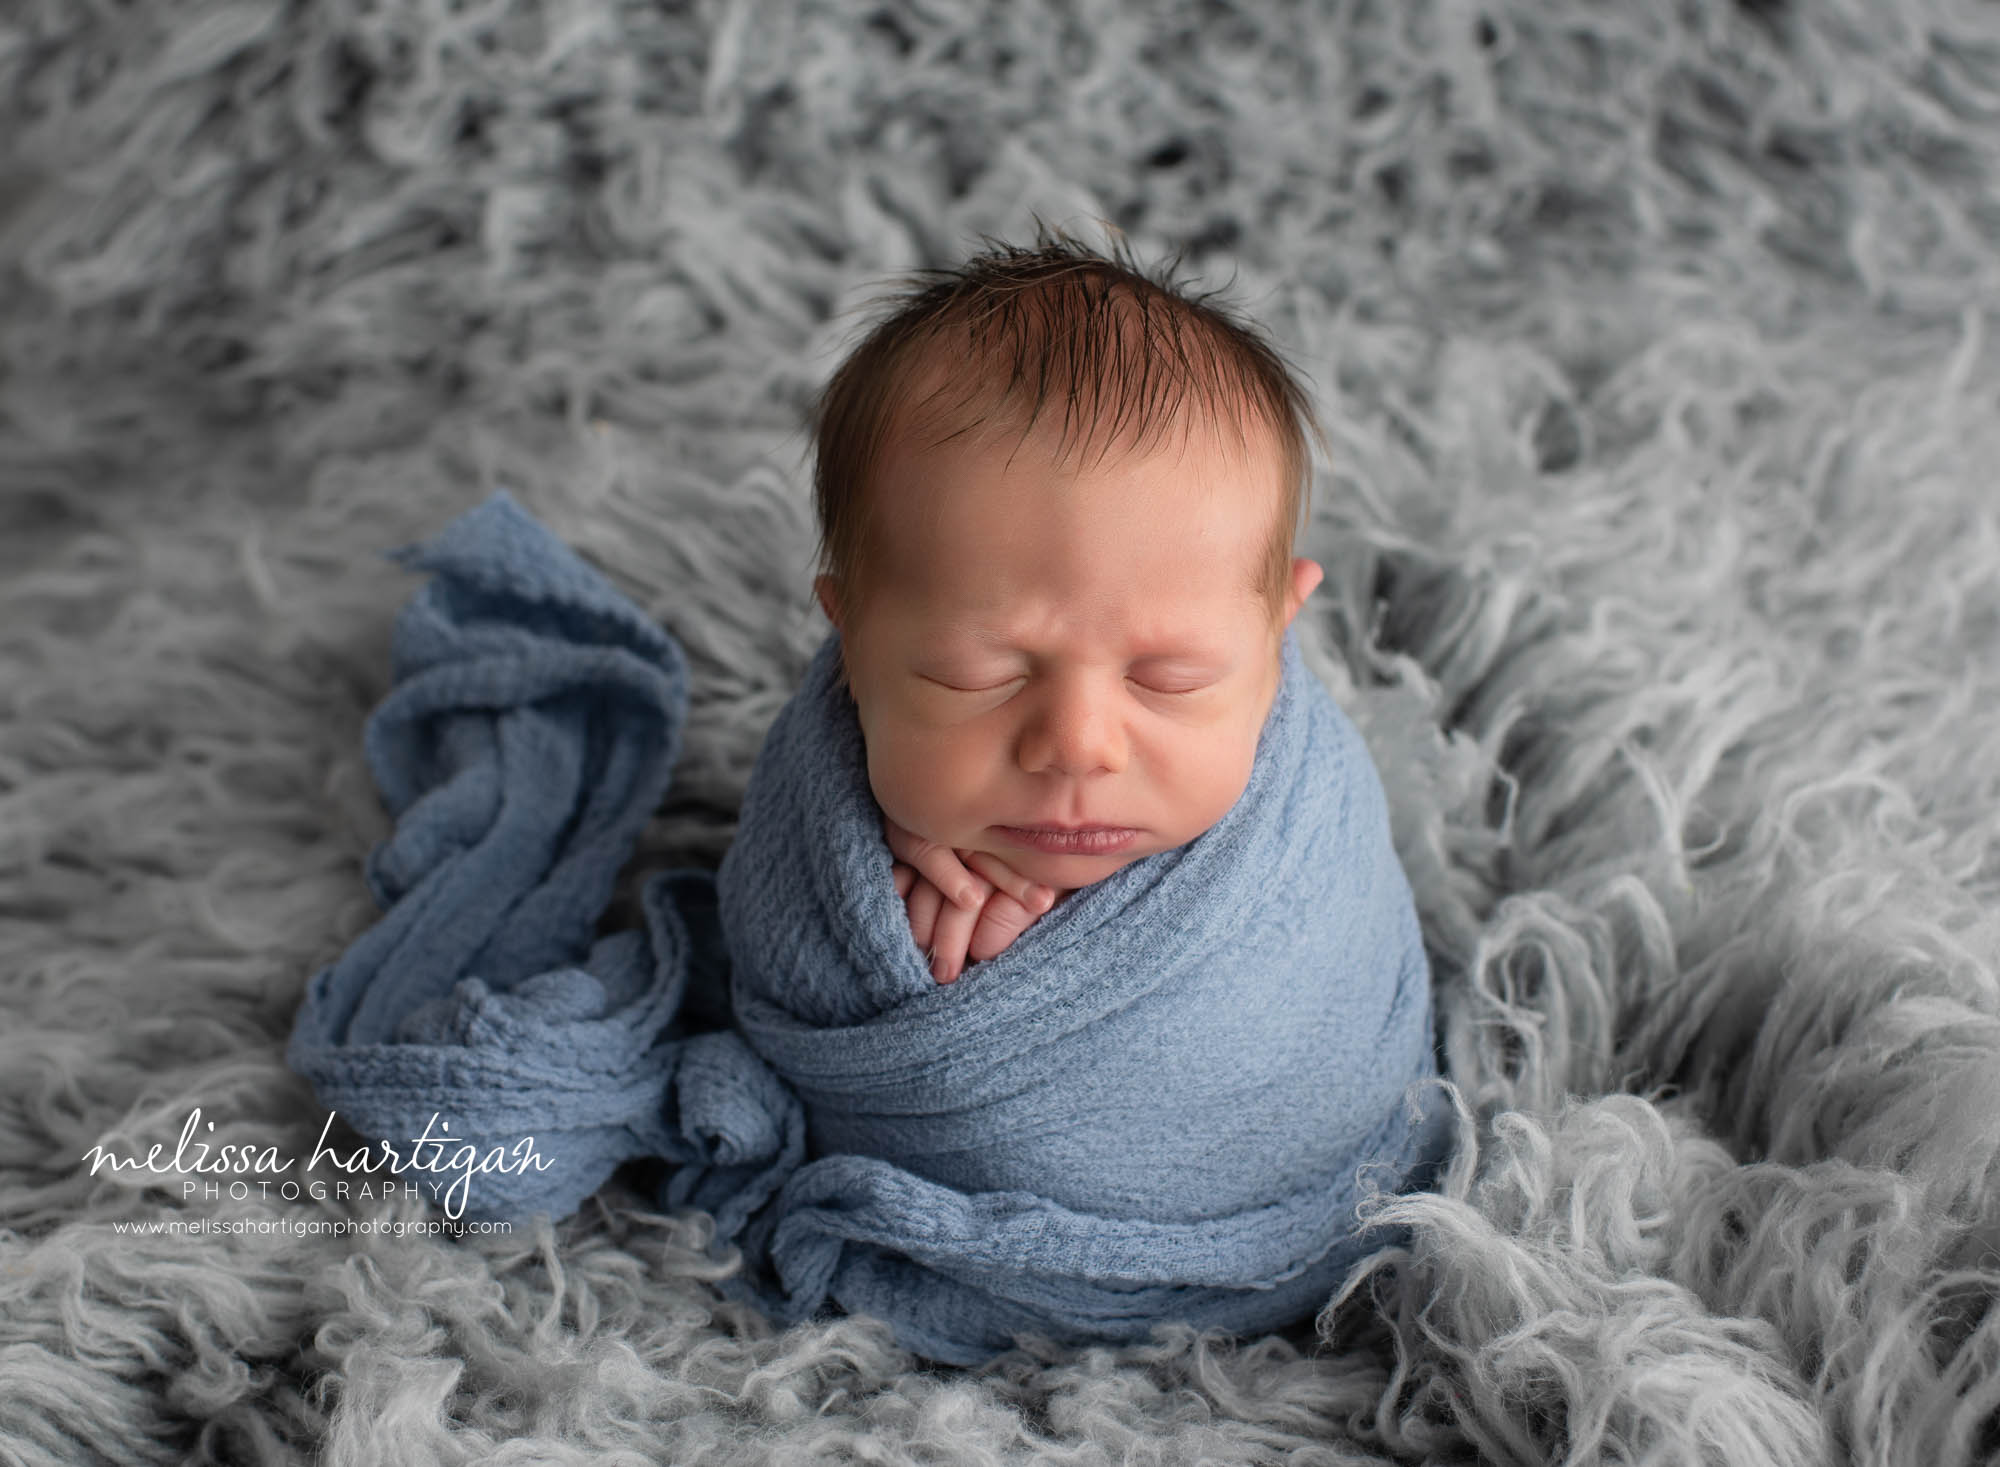 baby boy wrapped in blue wrapp posed on flokati rug newborn photography